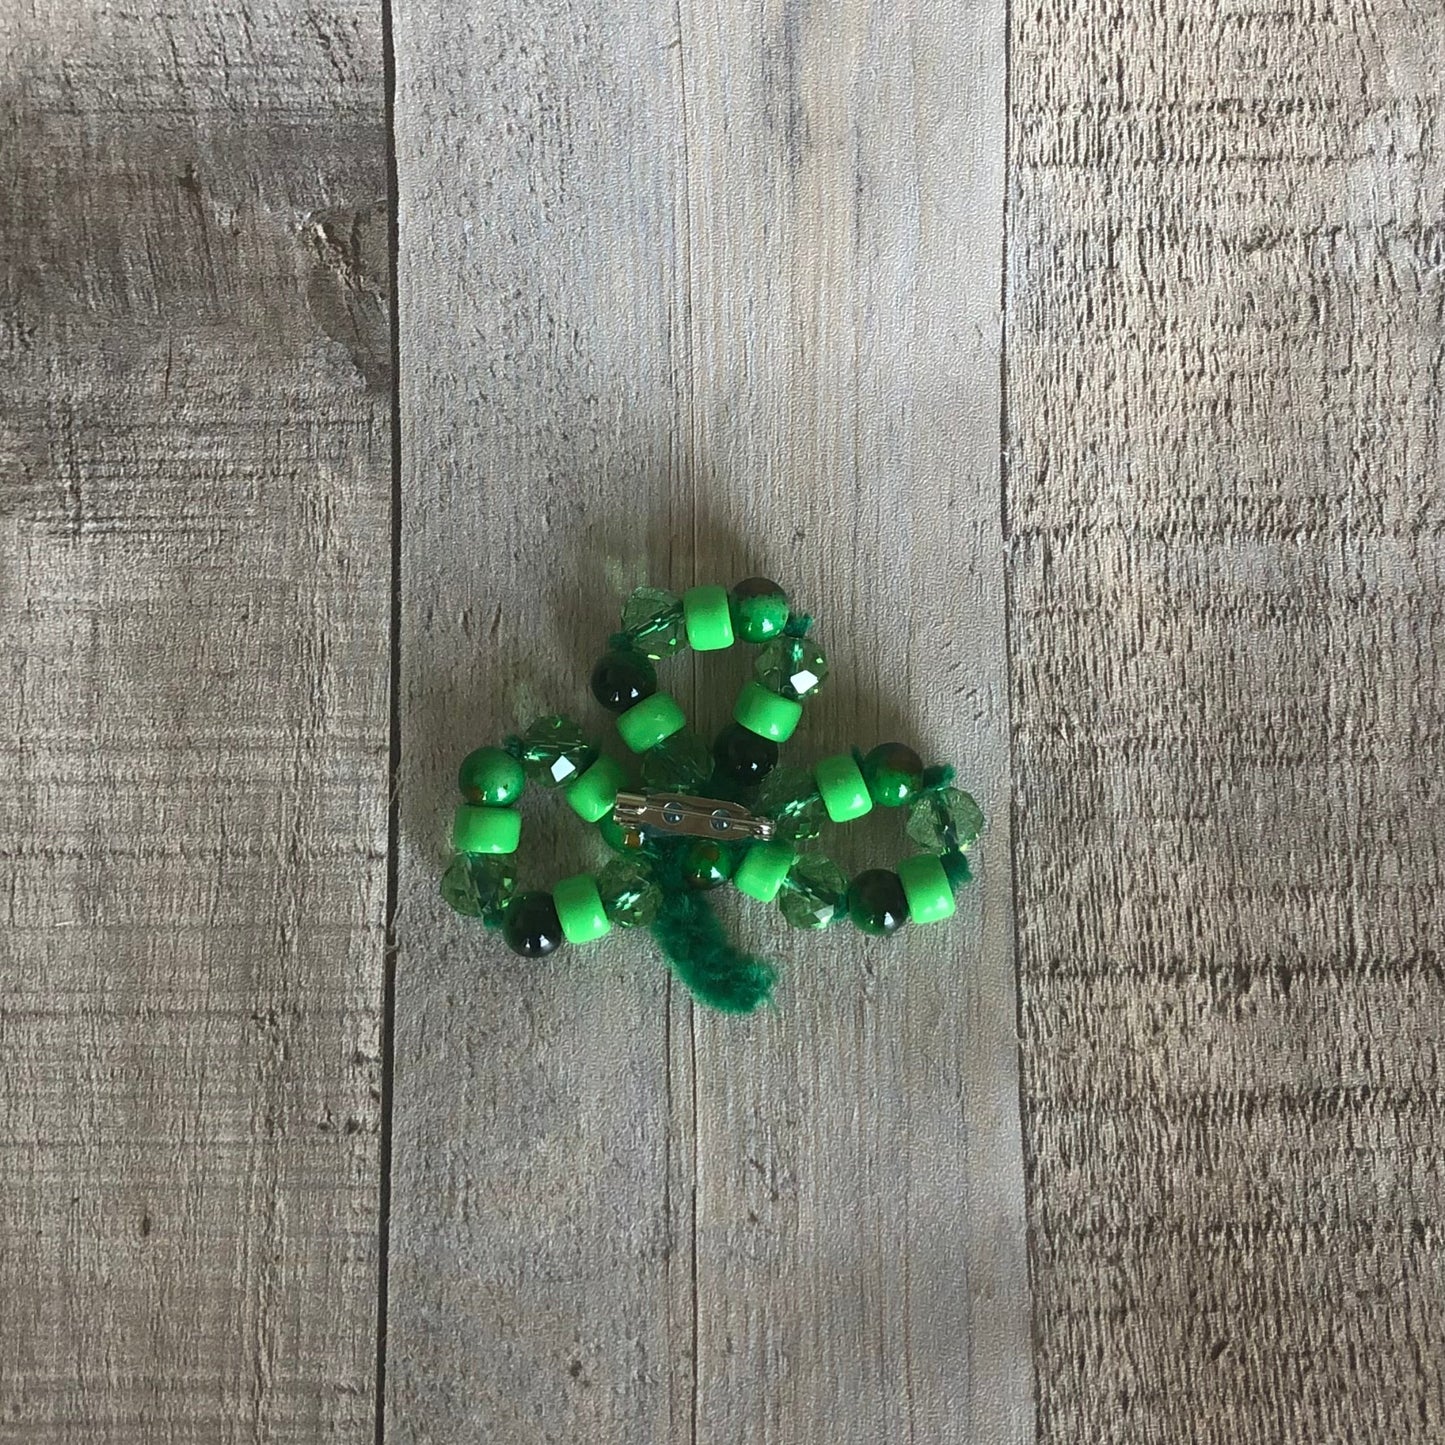 back side of beaded shamrock craft. The craft kit is available on seniorlycreations.com.